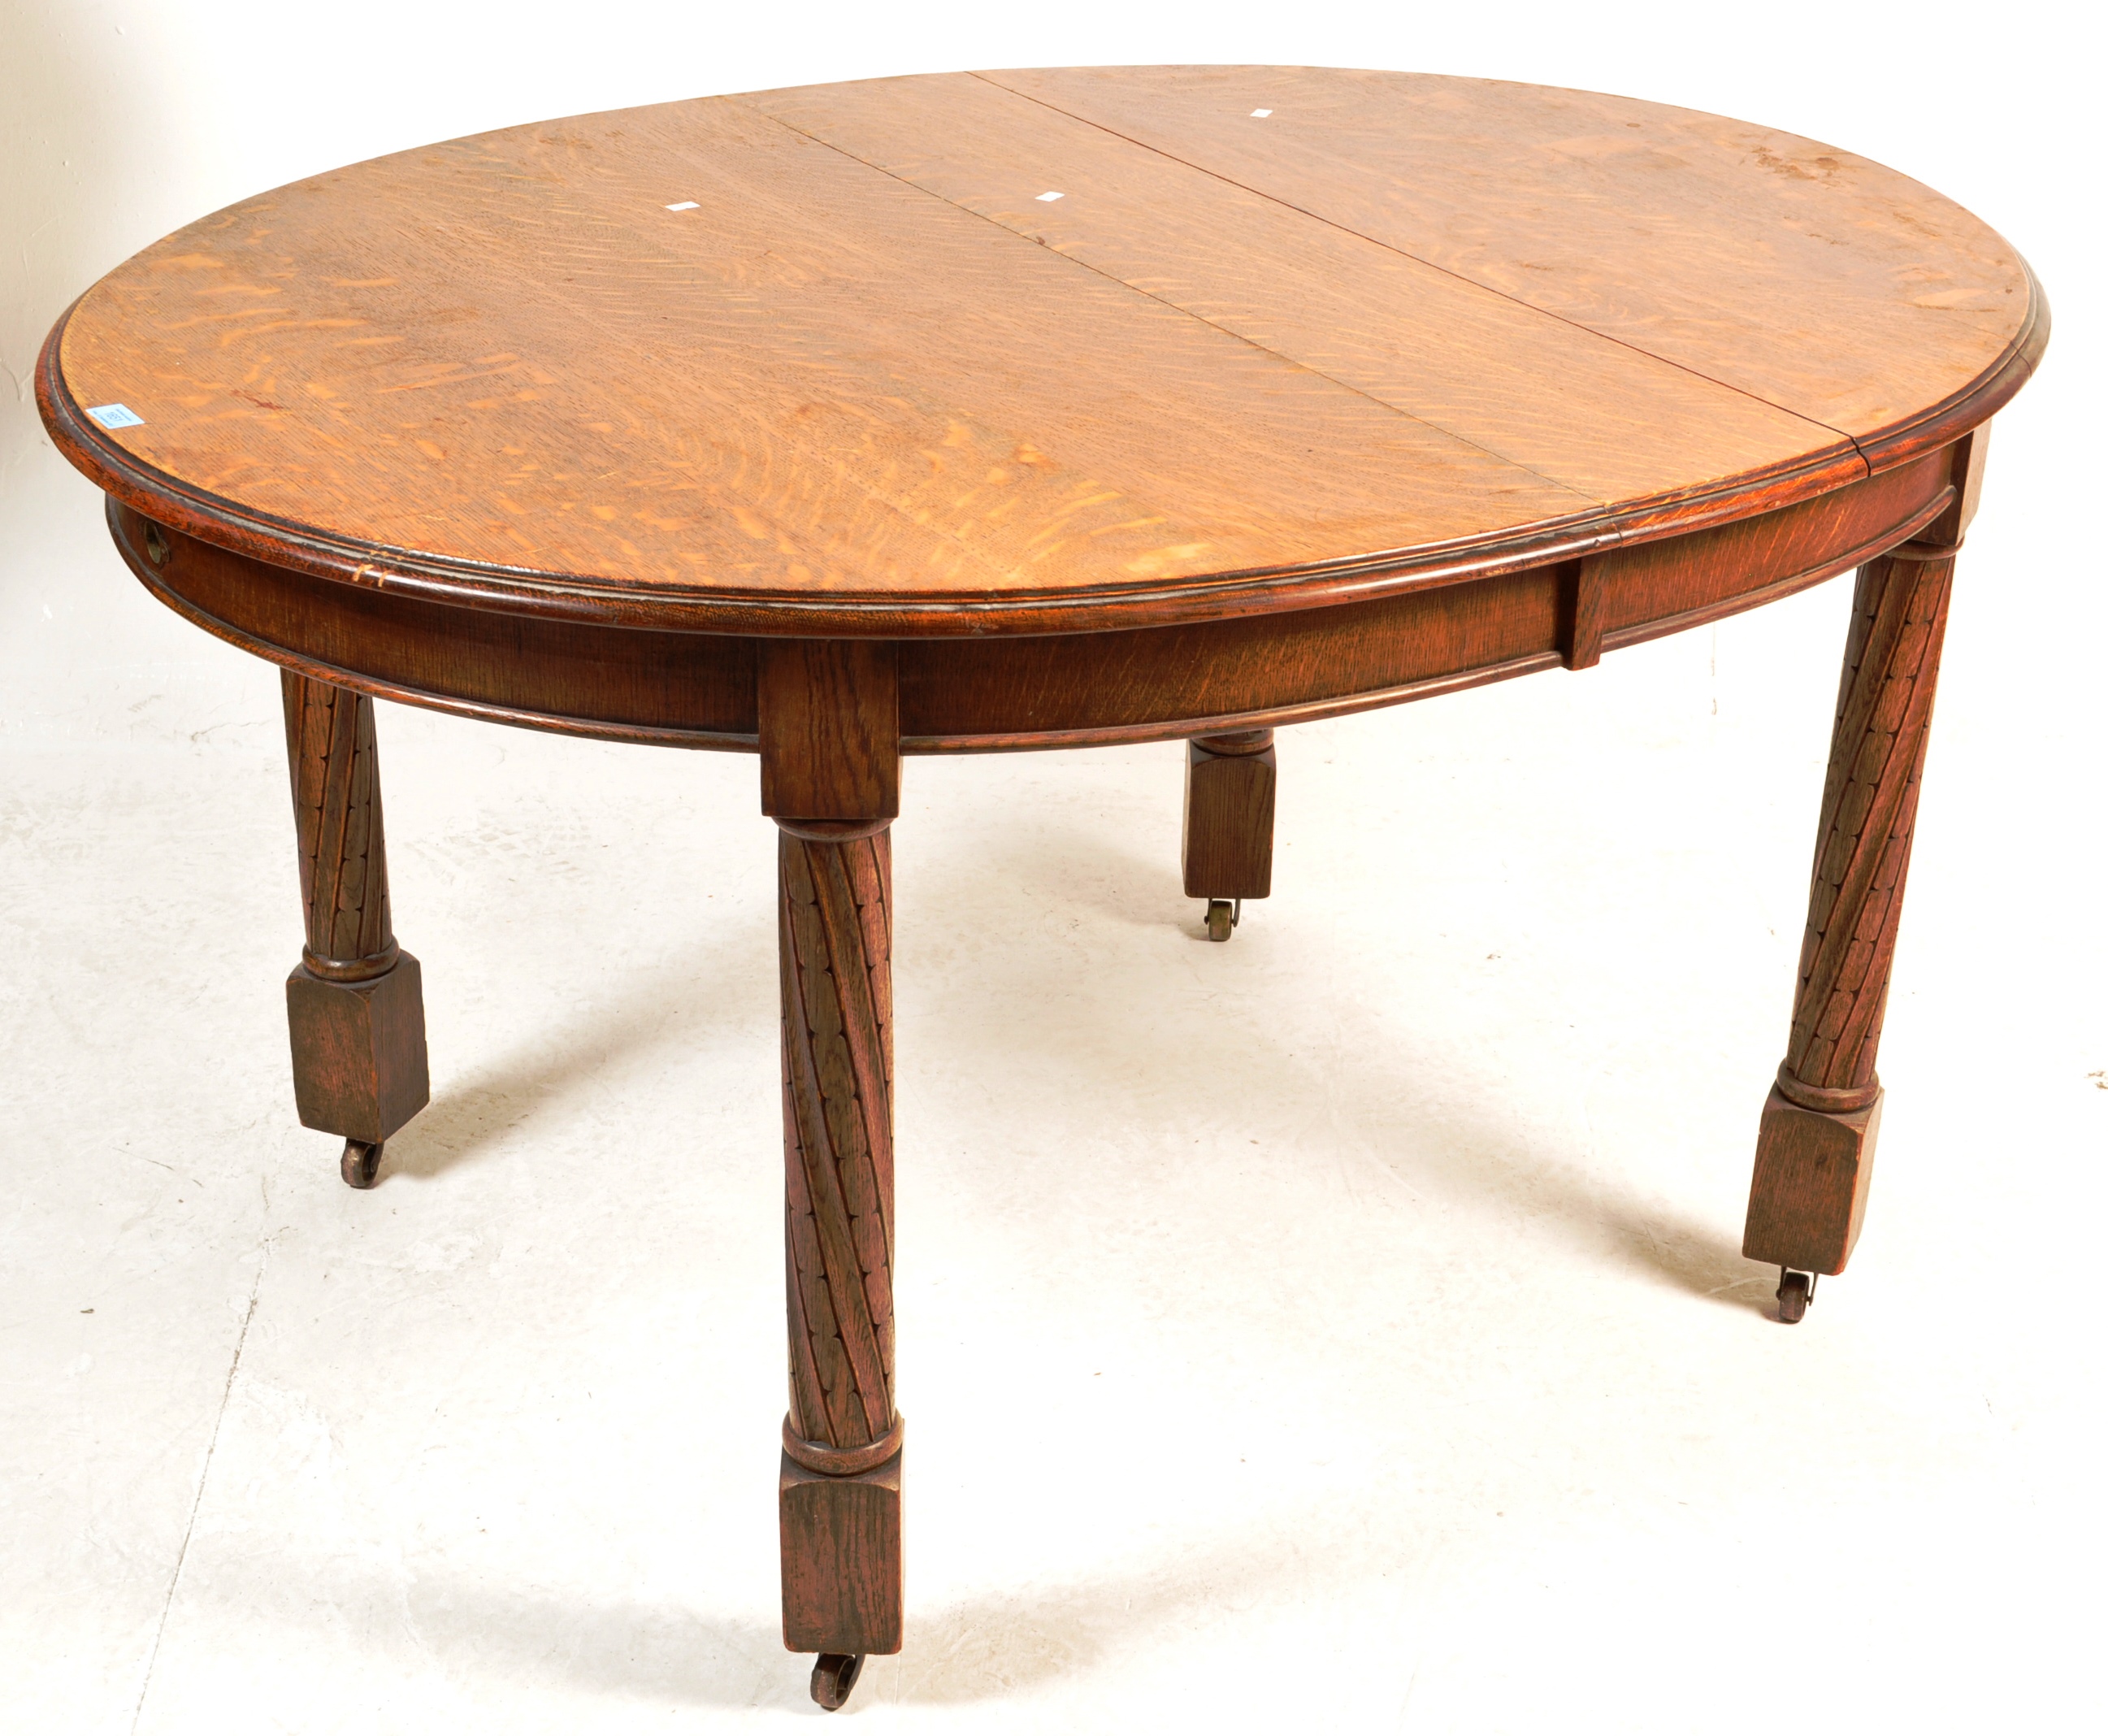 1920S SOLID OAK OVAL EXTENDING DINING TABLE - Image 2 of 4